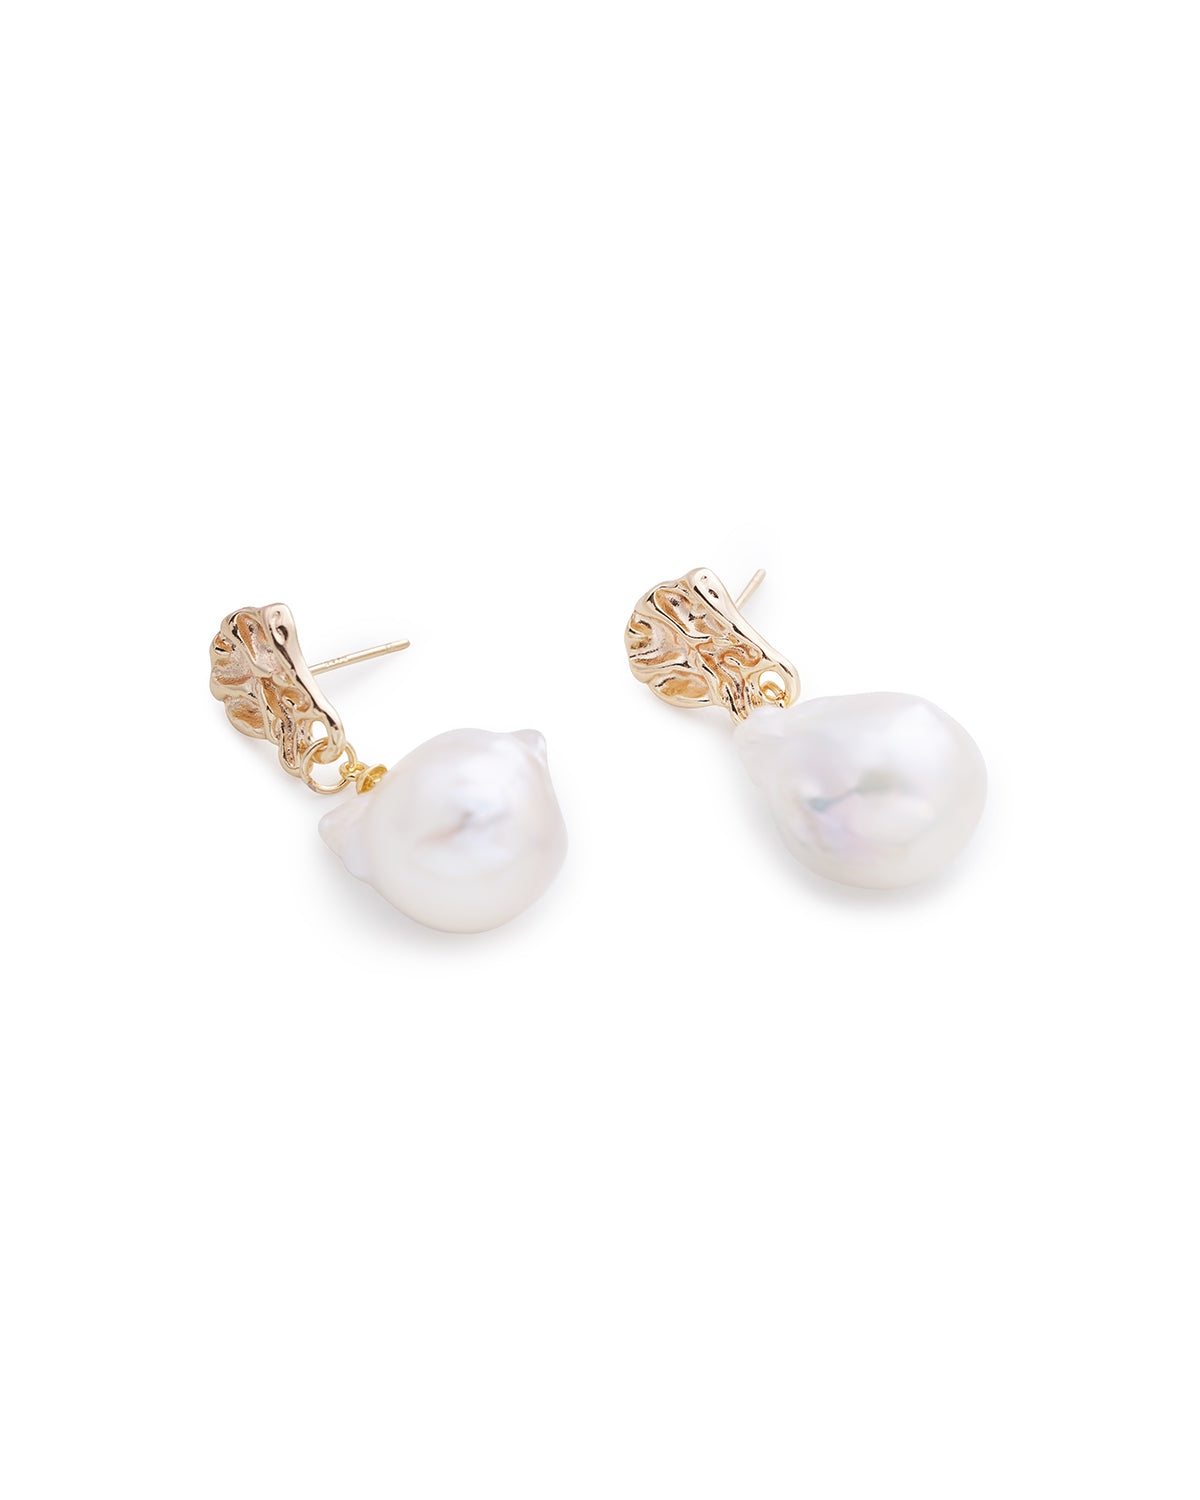 Vintage Style 14K Gold Filled Natural Freshwater  Baroque Pearl Drop Earrings